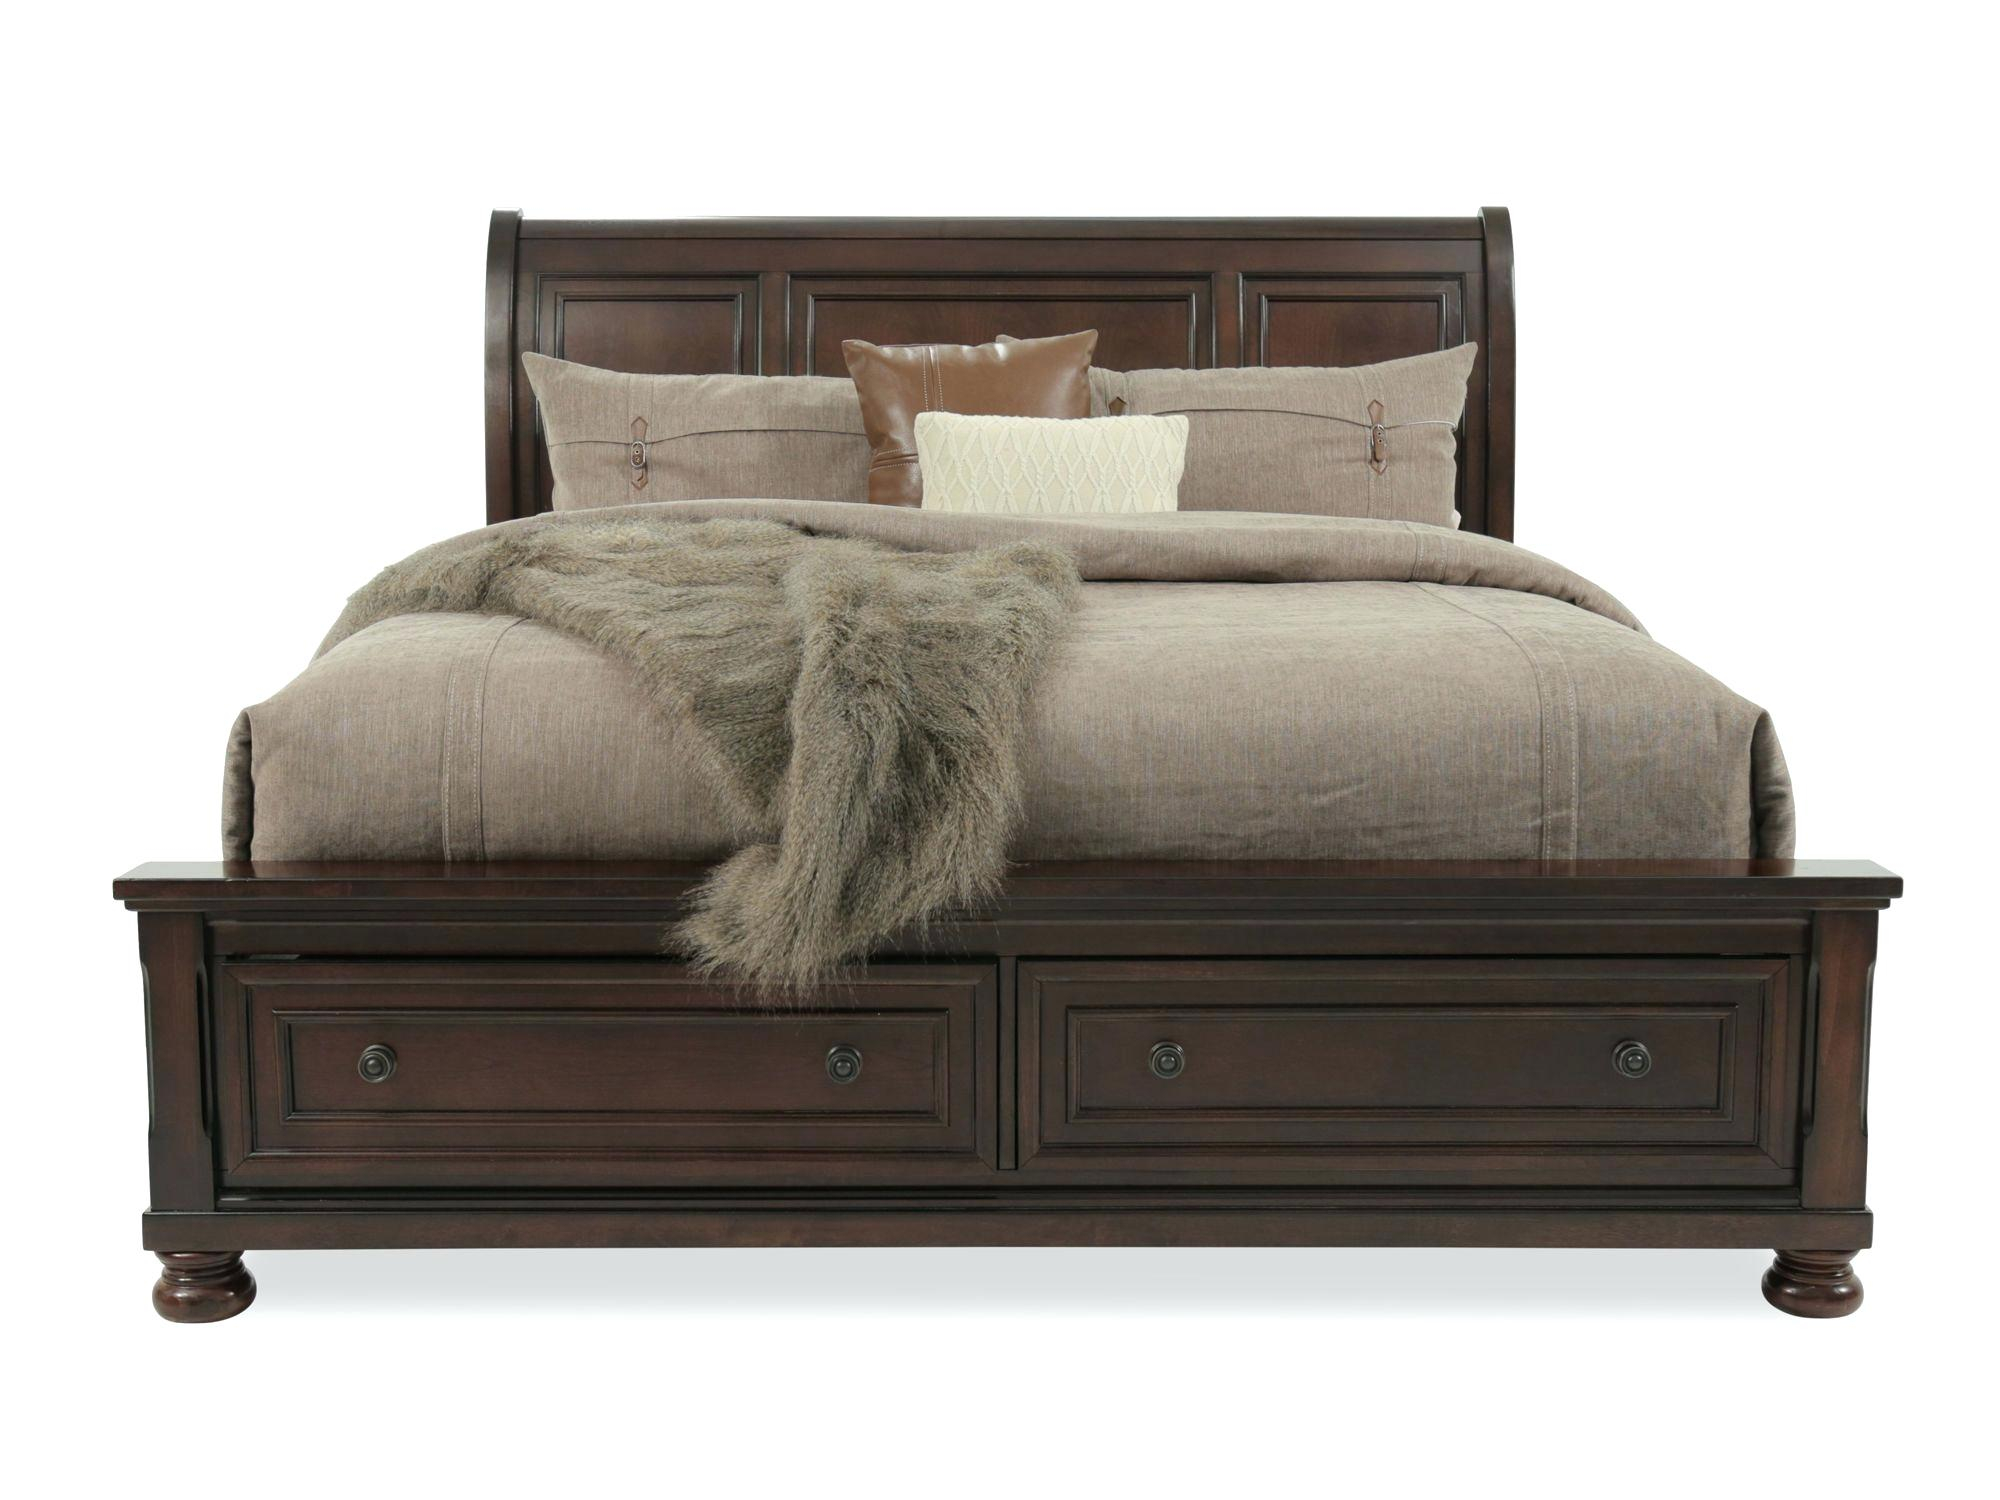 Sleigh Bed King Bedroom Set Myalchemy with regard to dimensions 2000 X 1500